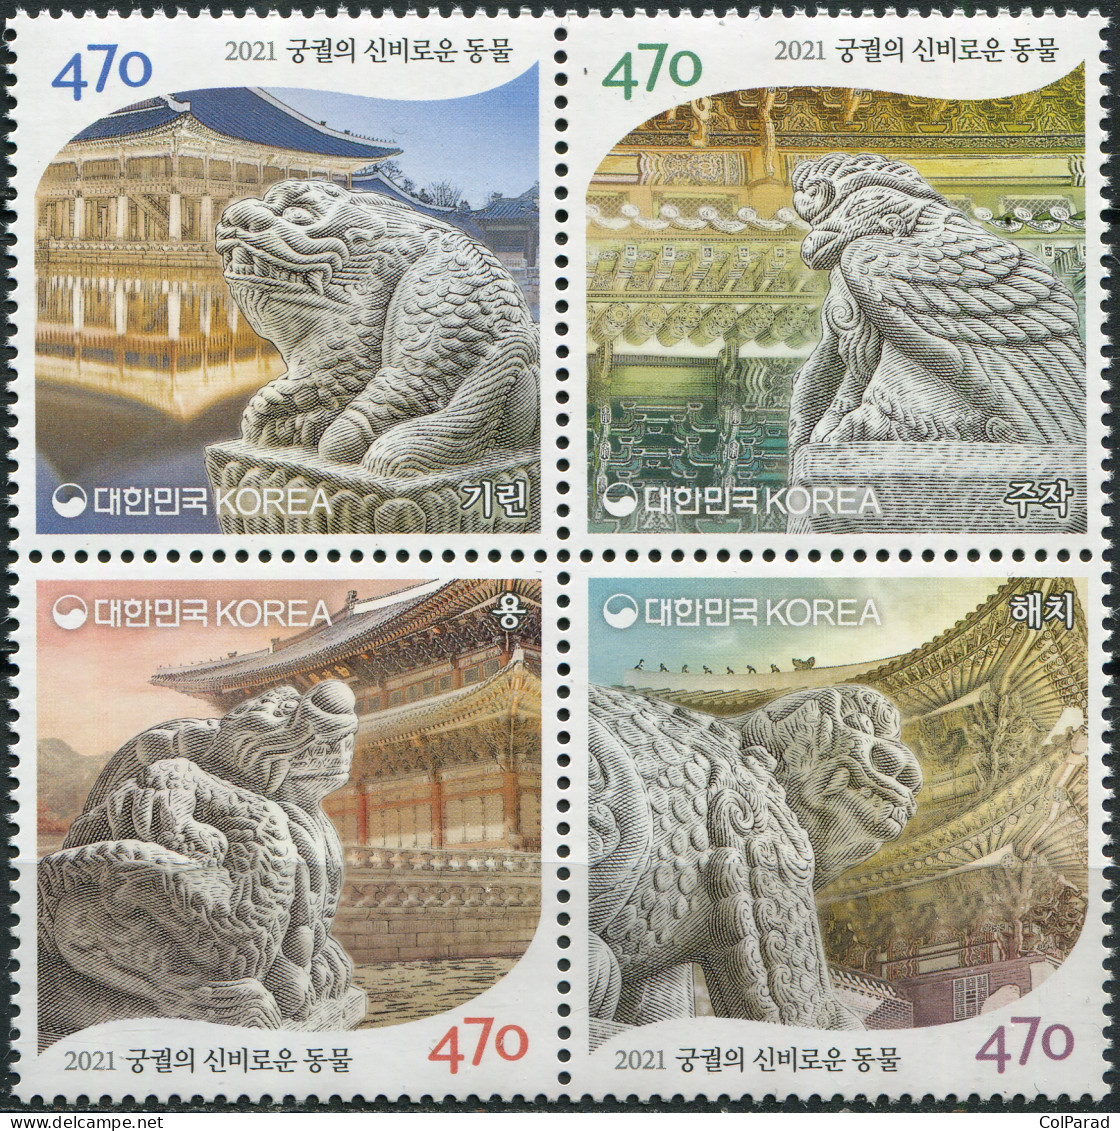 SOUTH KOREA - 2021 - BLOCK OF 4 STAMPS MNH ** - Statues Of Mythical Creatures - Corea Del Sur